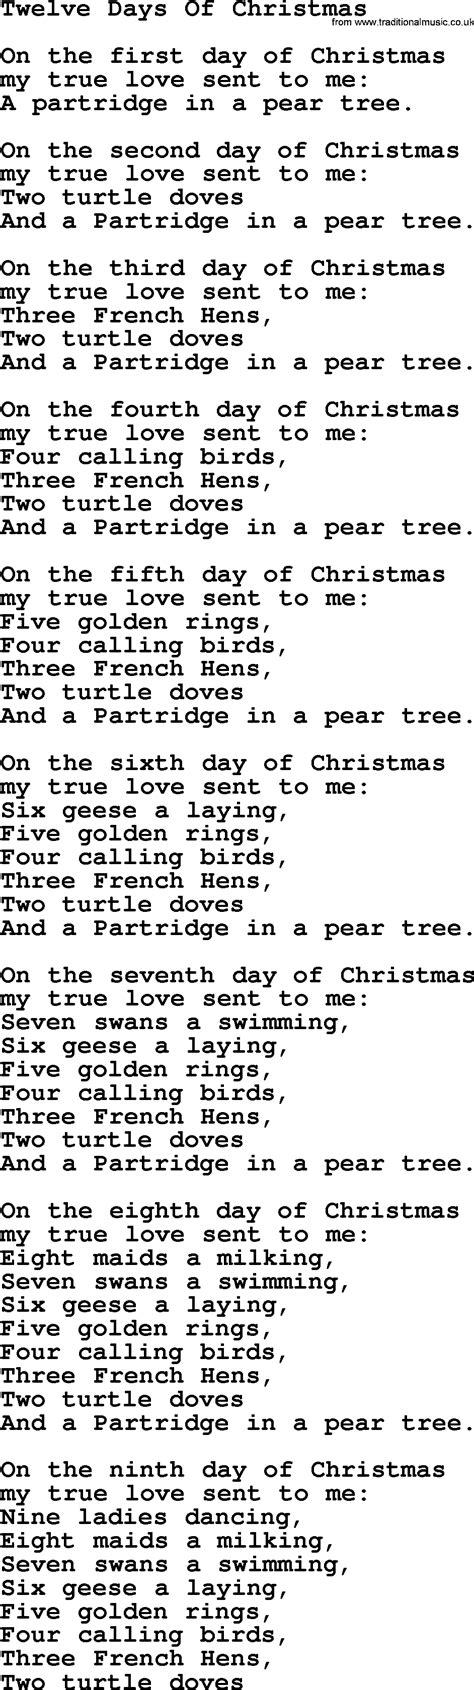 The Twelve Days of Christmas Lyrics. [Verse 1]On the first day of Christmas, my true love sent to meA partridge in a pear tree[Verse 2]On the second day of Christmas, my …. 